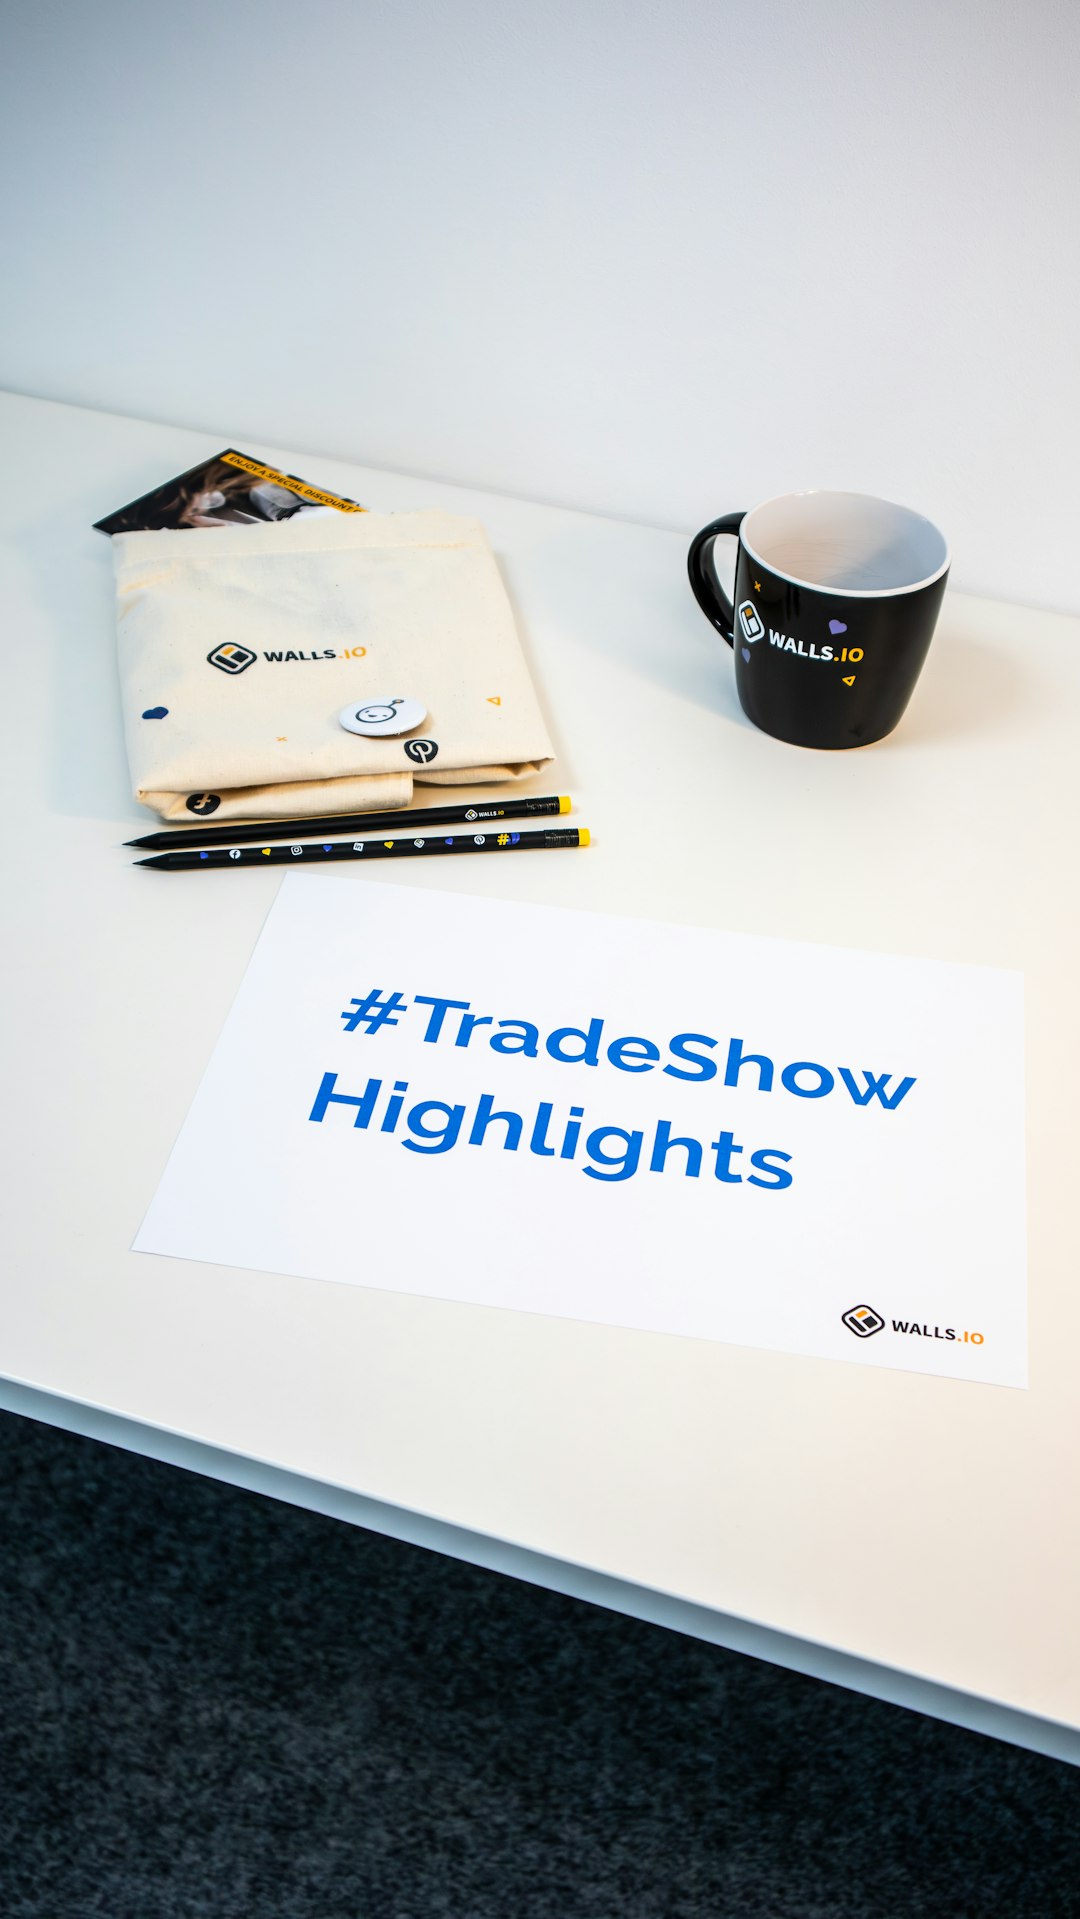 A collection of branded merch and freebies for events with the hashtag #TradeShowHighlights